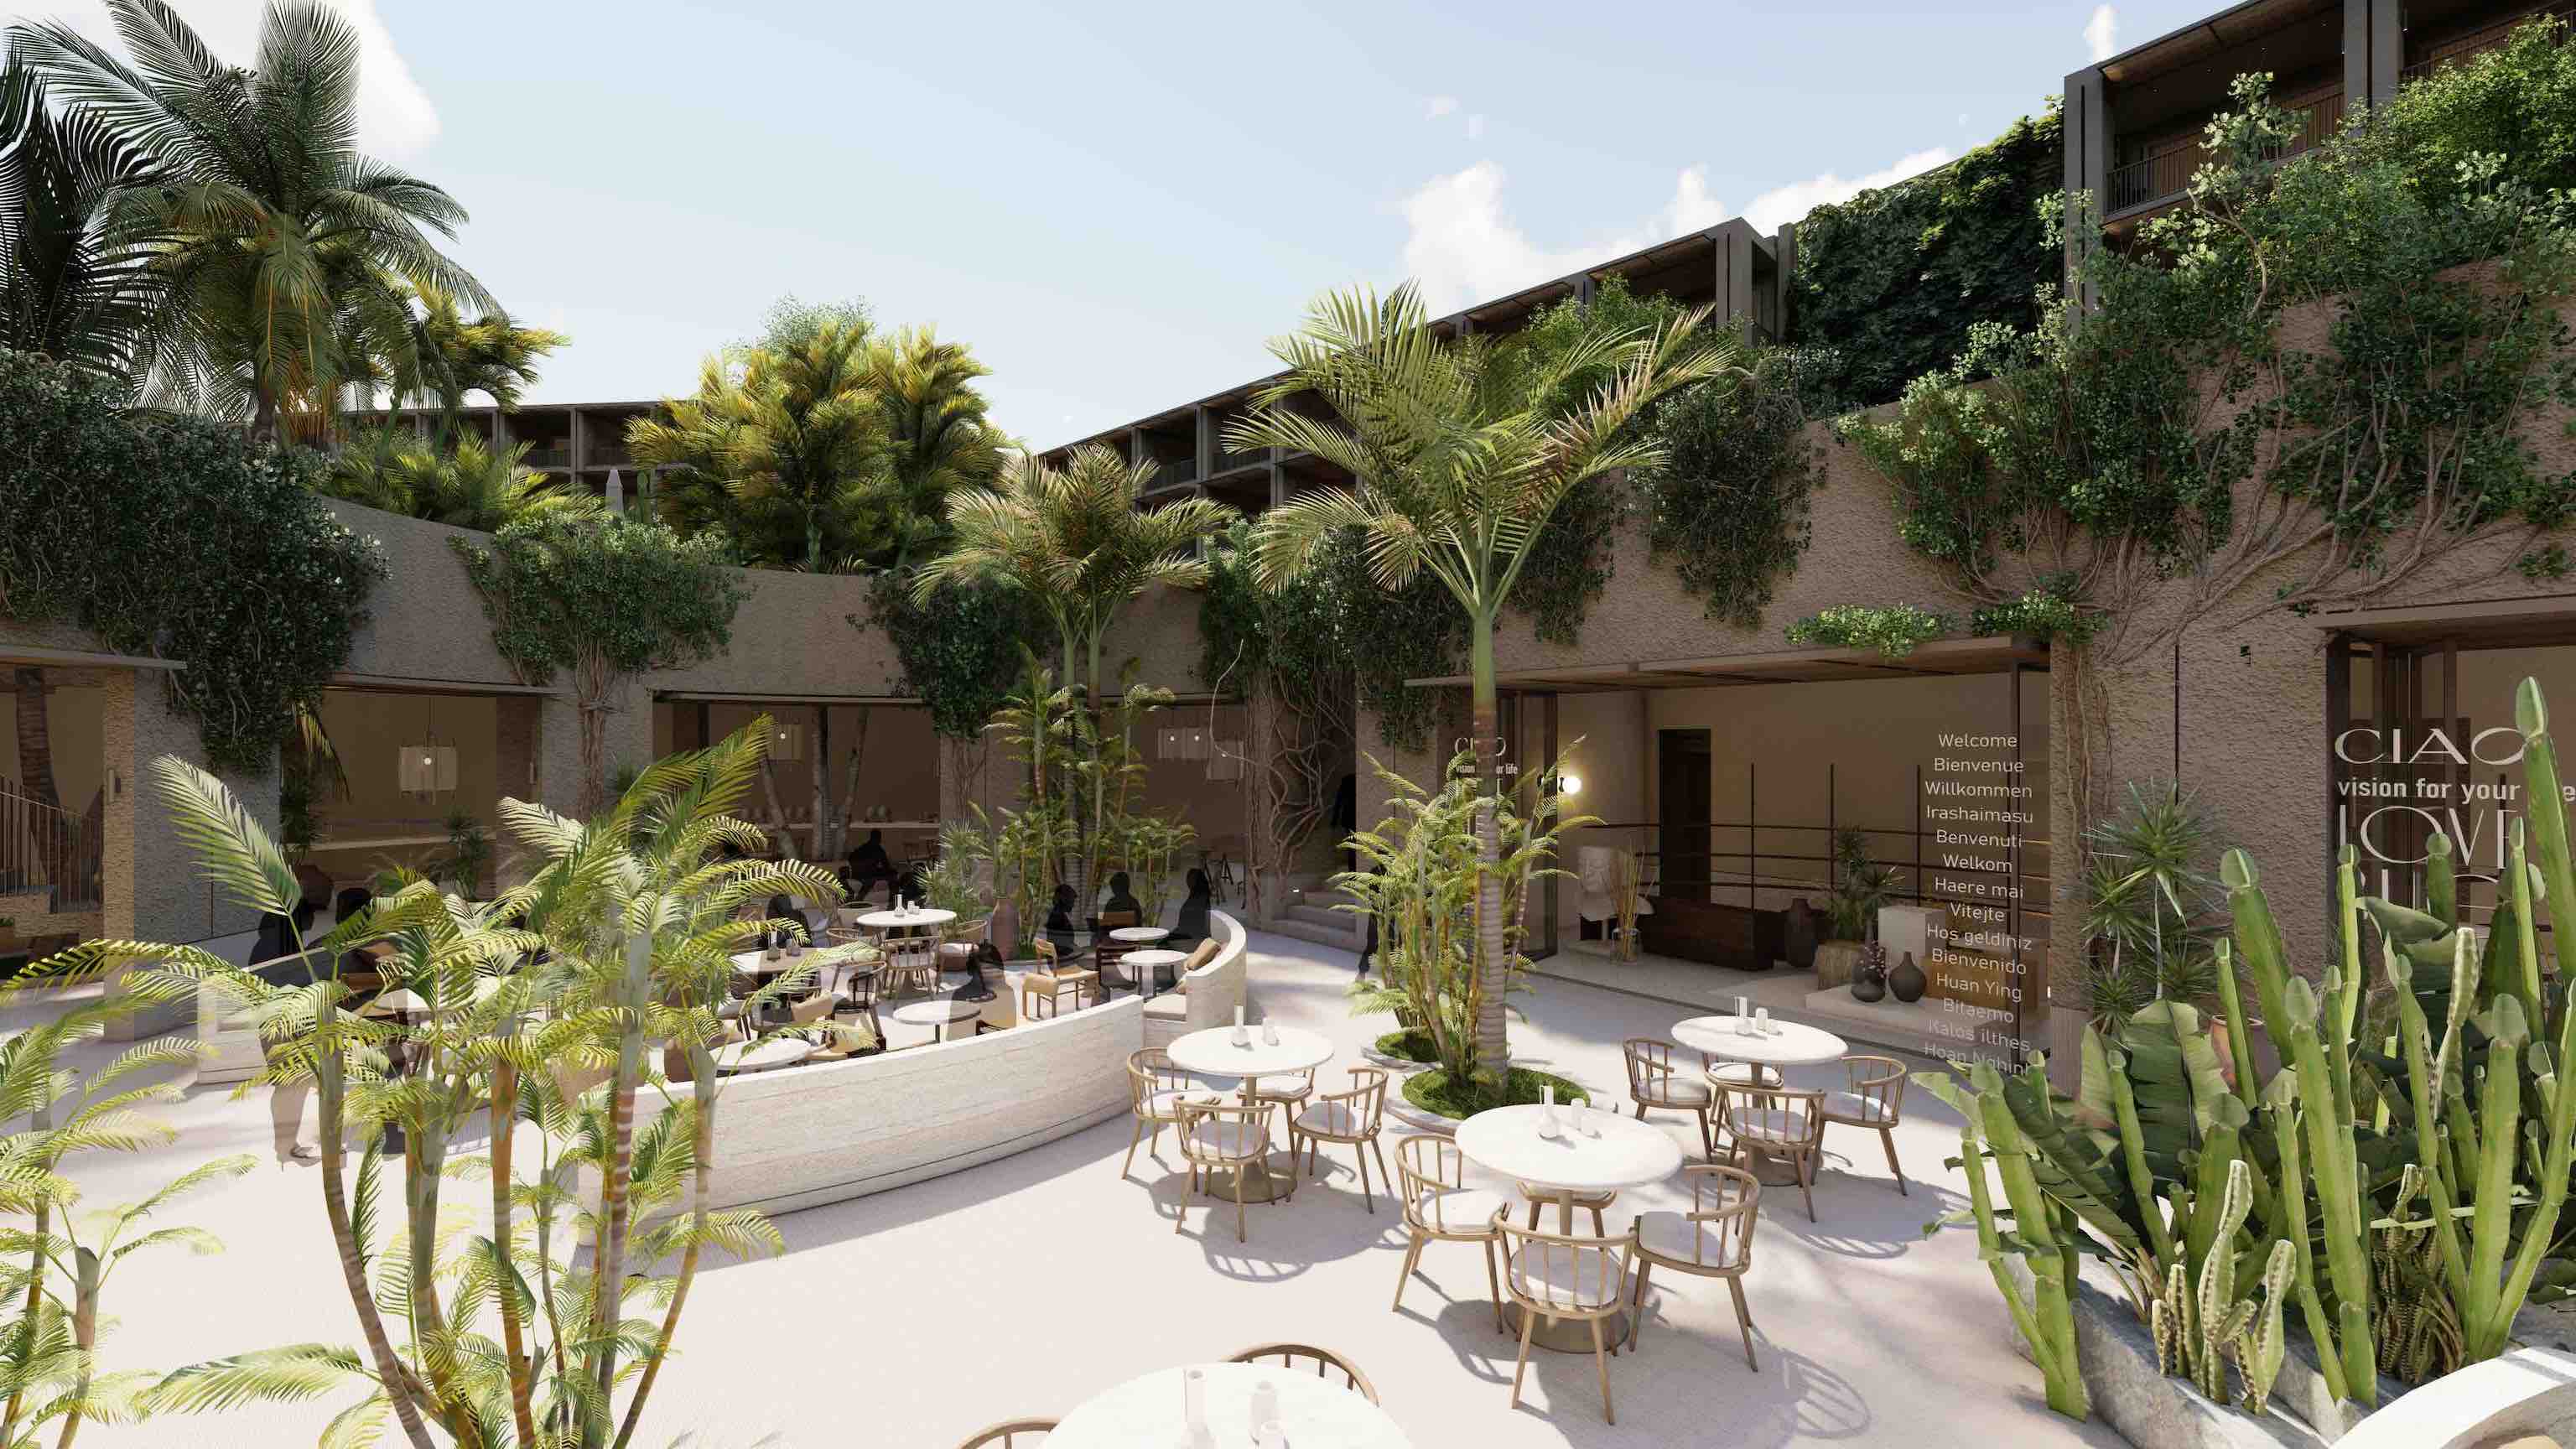 Large courtyard with palm trees, plants, small white round tables and wooden chairs, and large open windows on a beige building